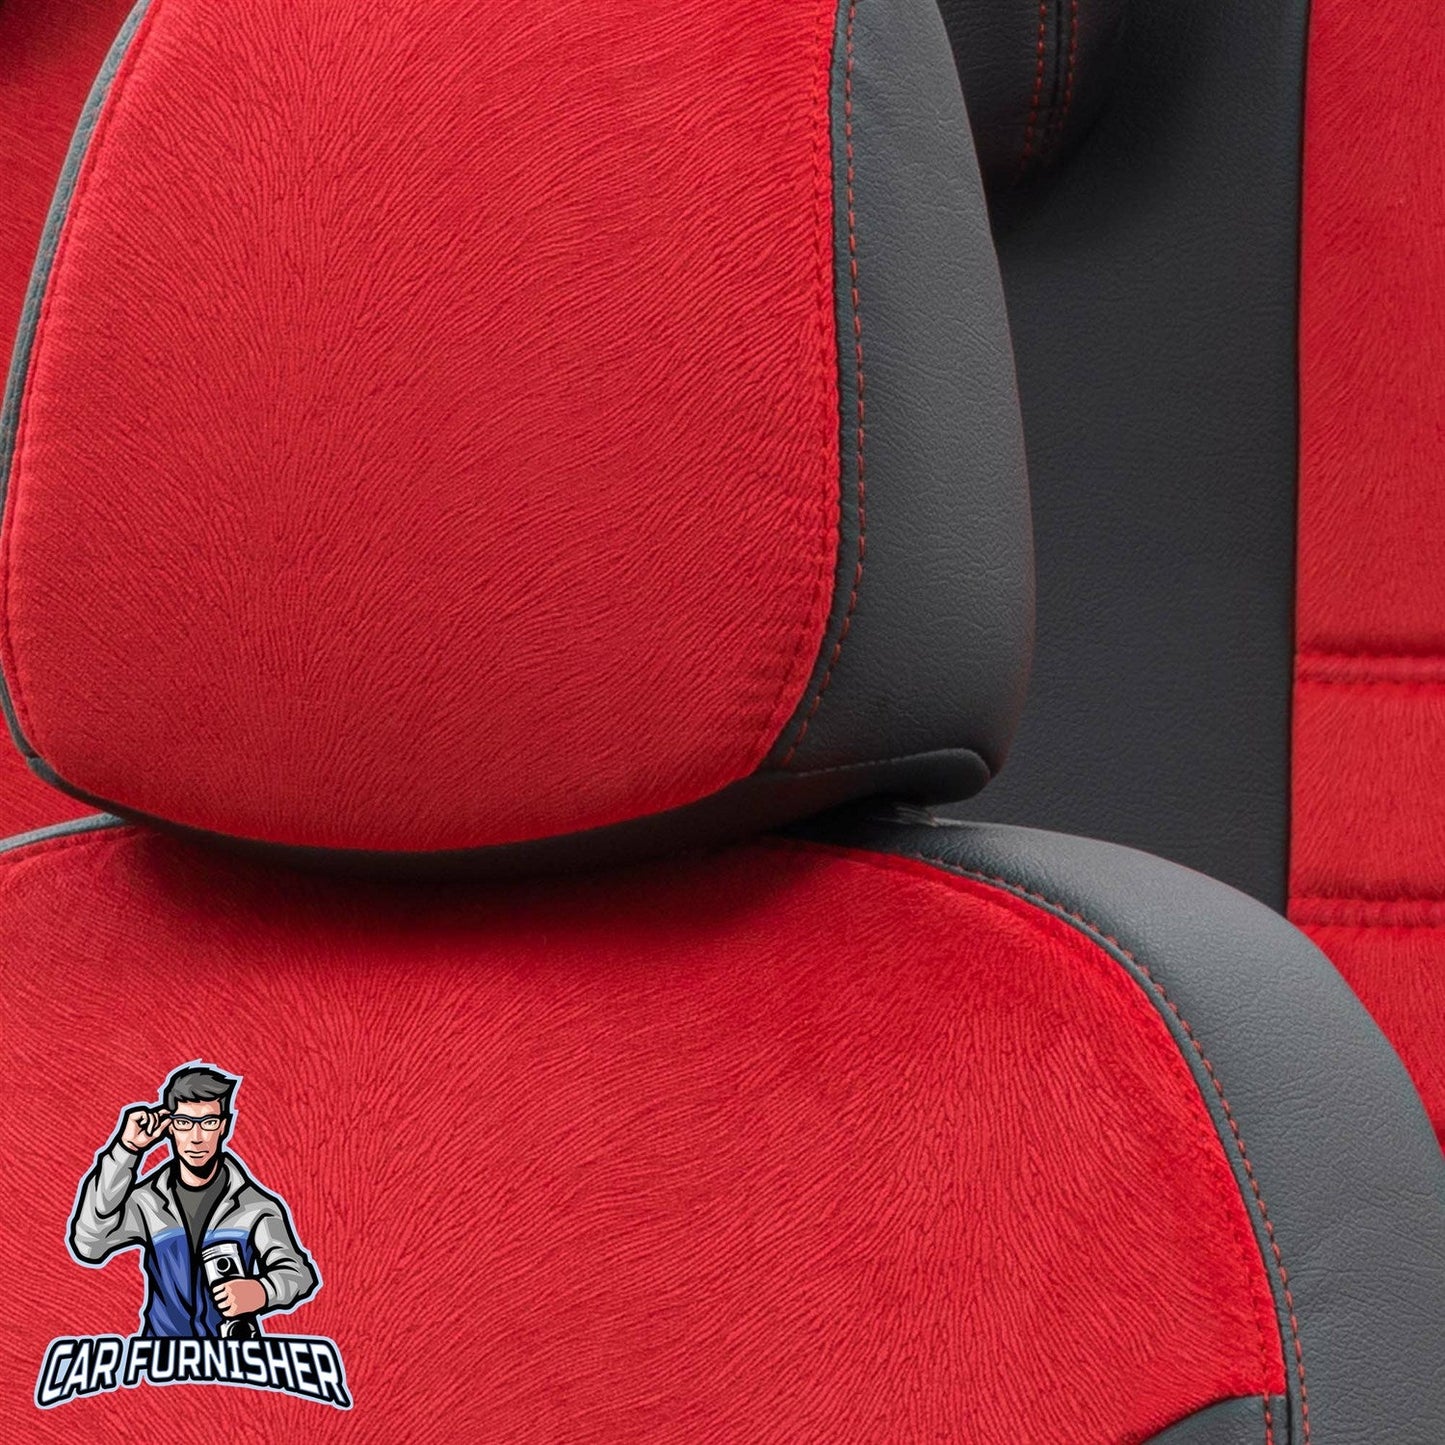 Toyota Avensis Seat Cover London Foal Feather Design Red Leather & Foal Feather